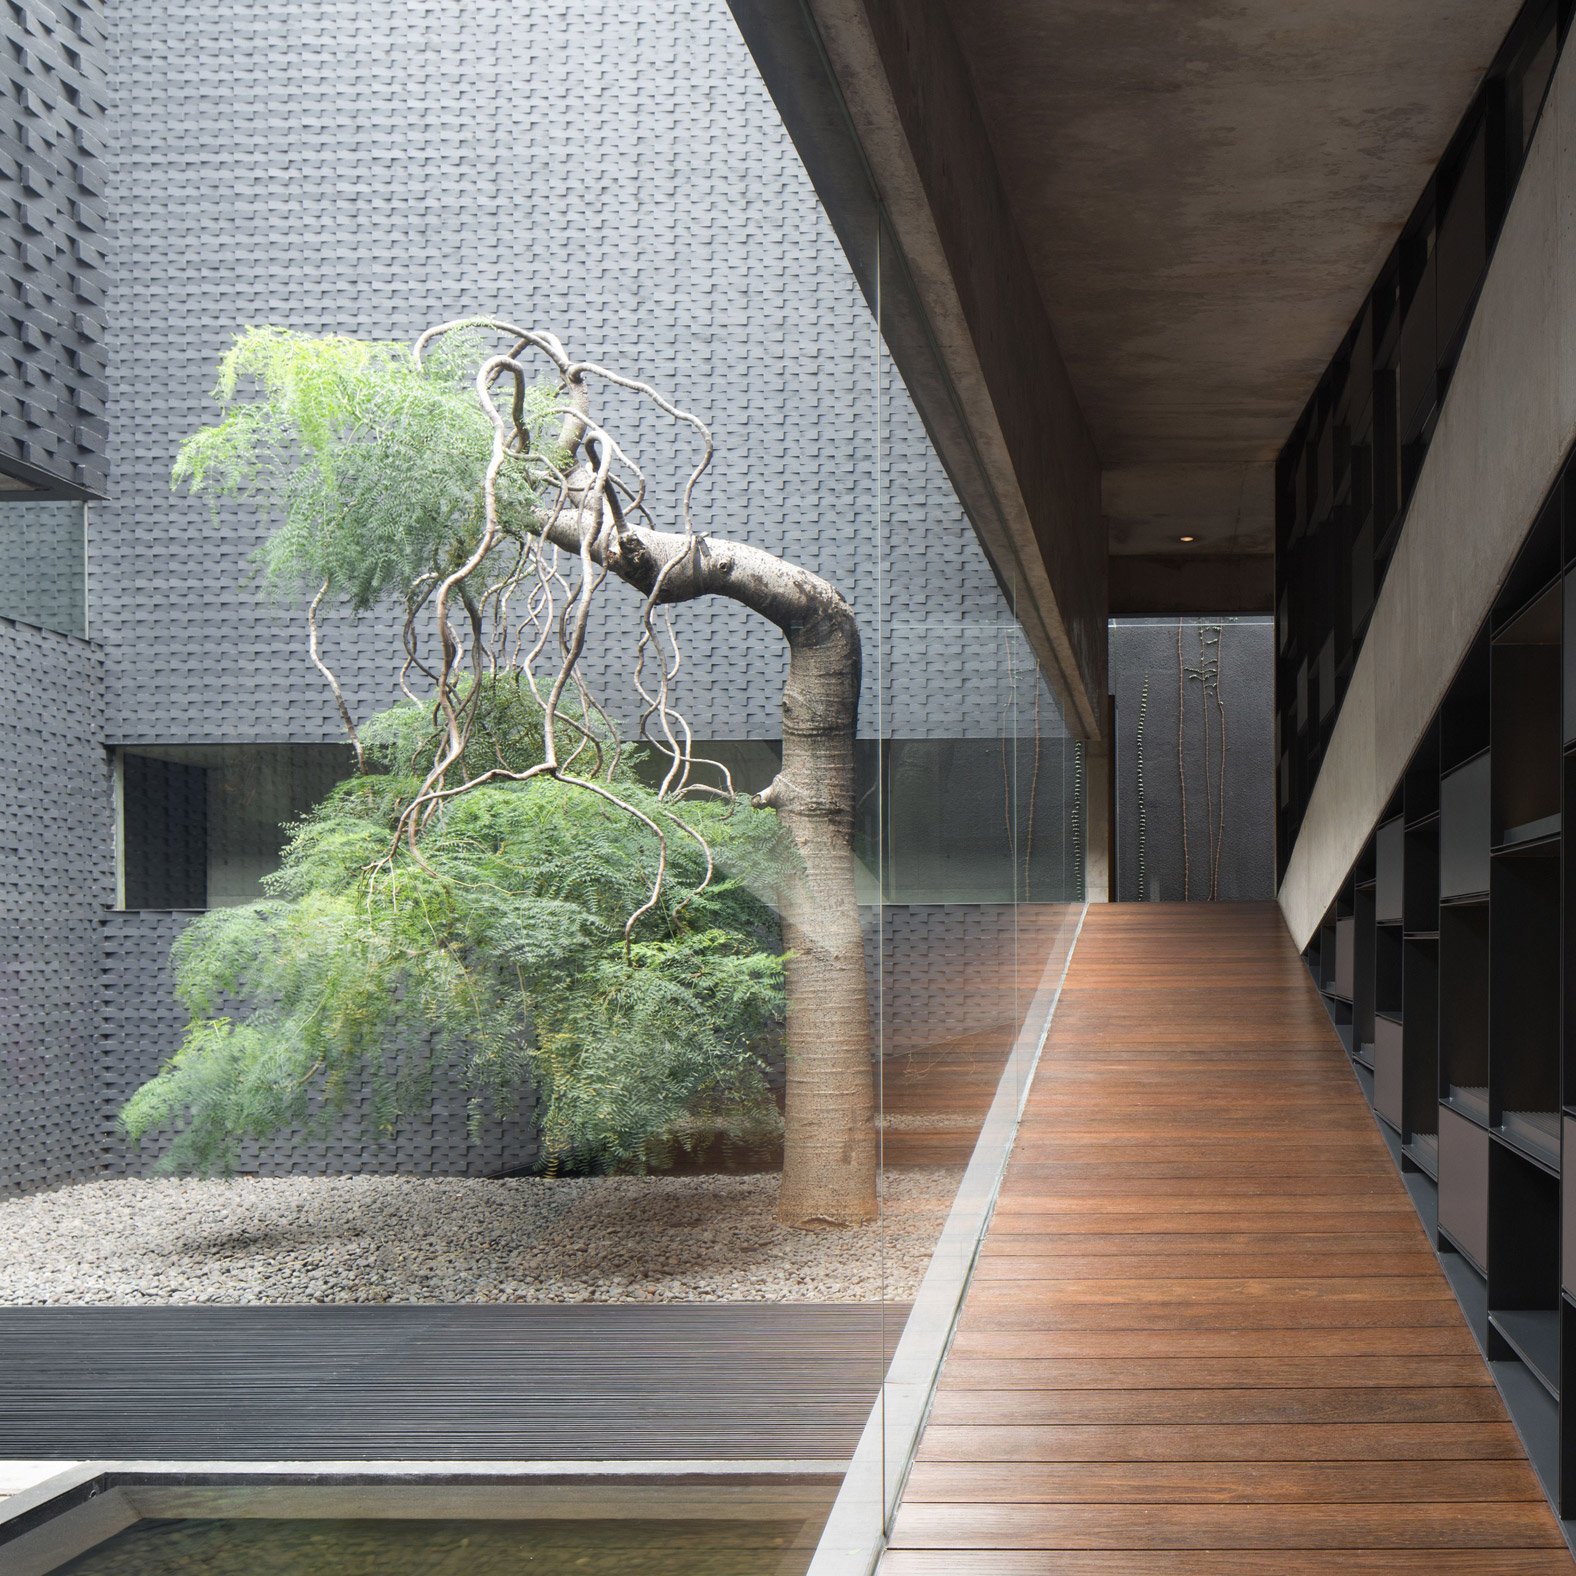 Courtyard living: Contemporary houses of the Asia-Pacific by Charmaine Chan